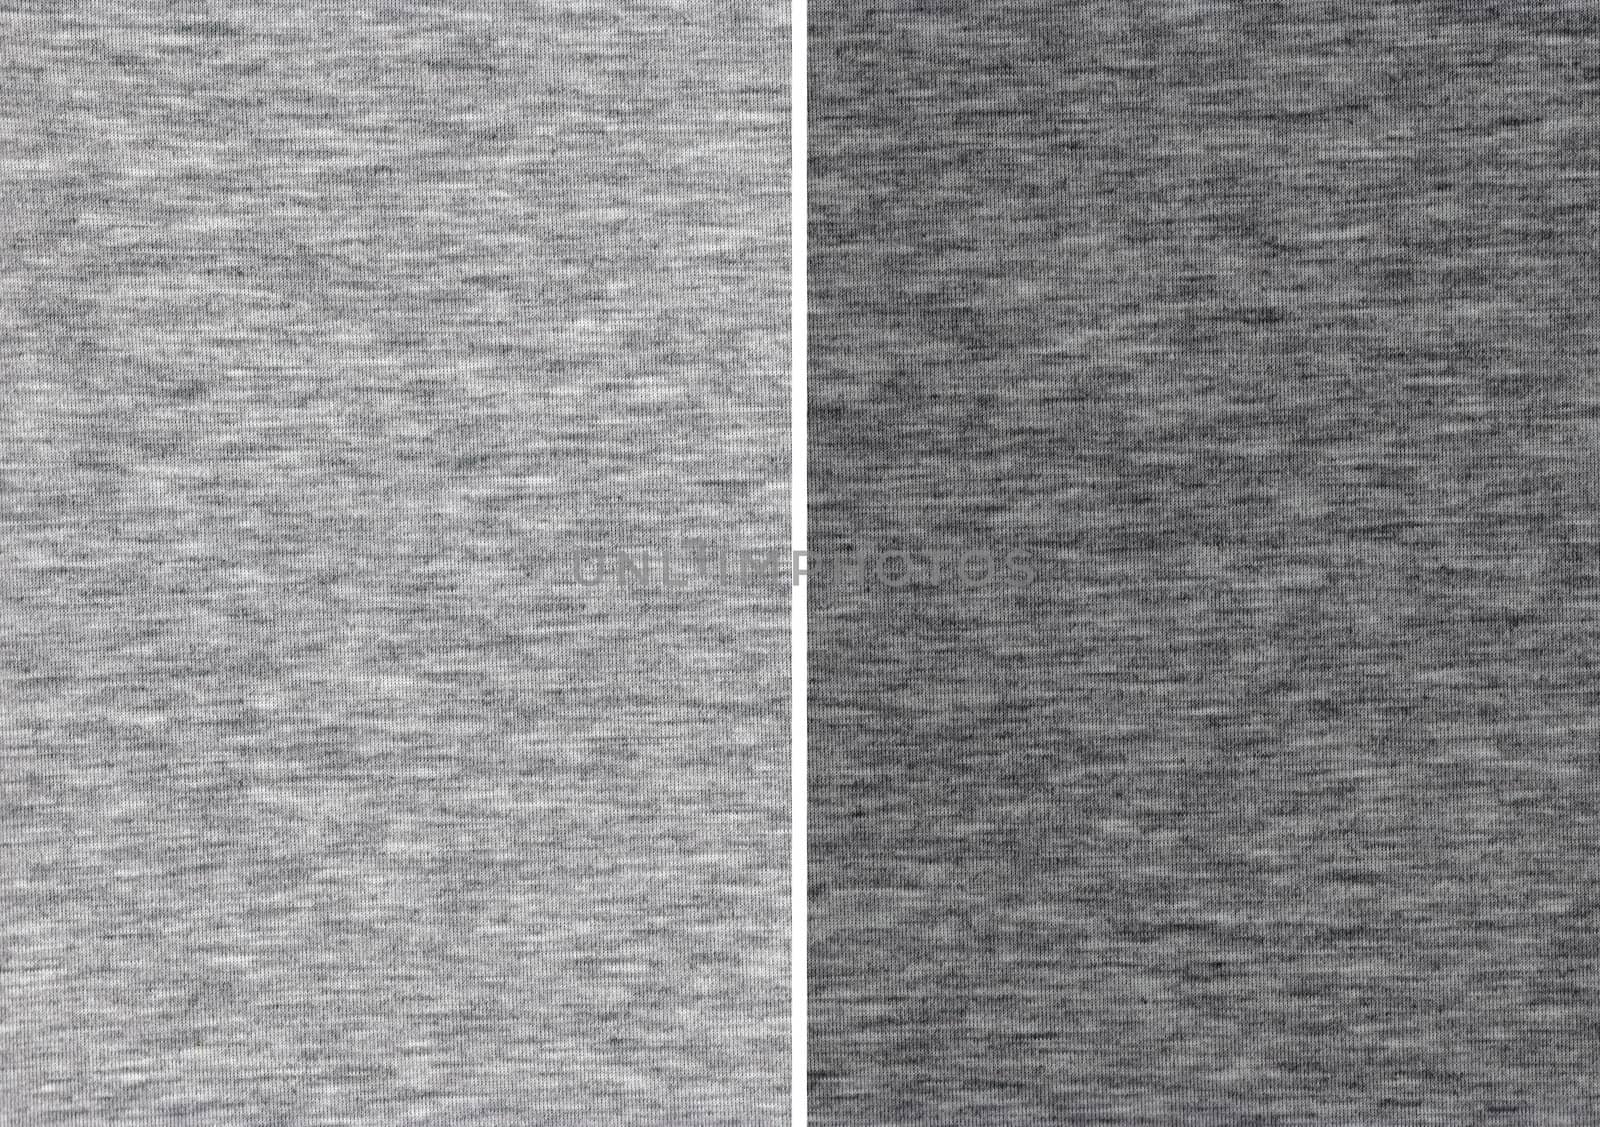 Texture of an Light and Dark Gray Cotton Textile